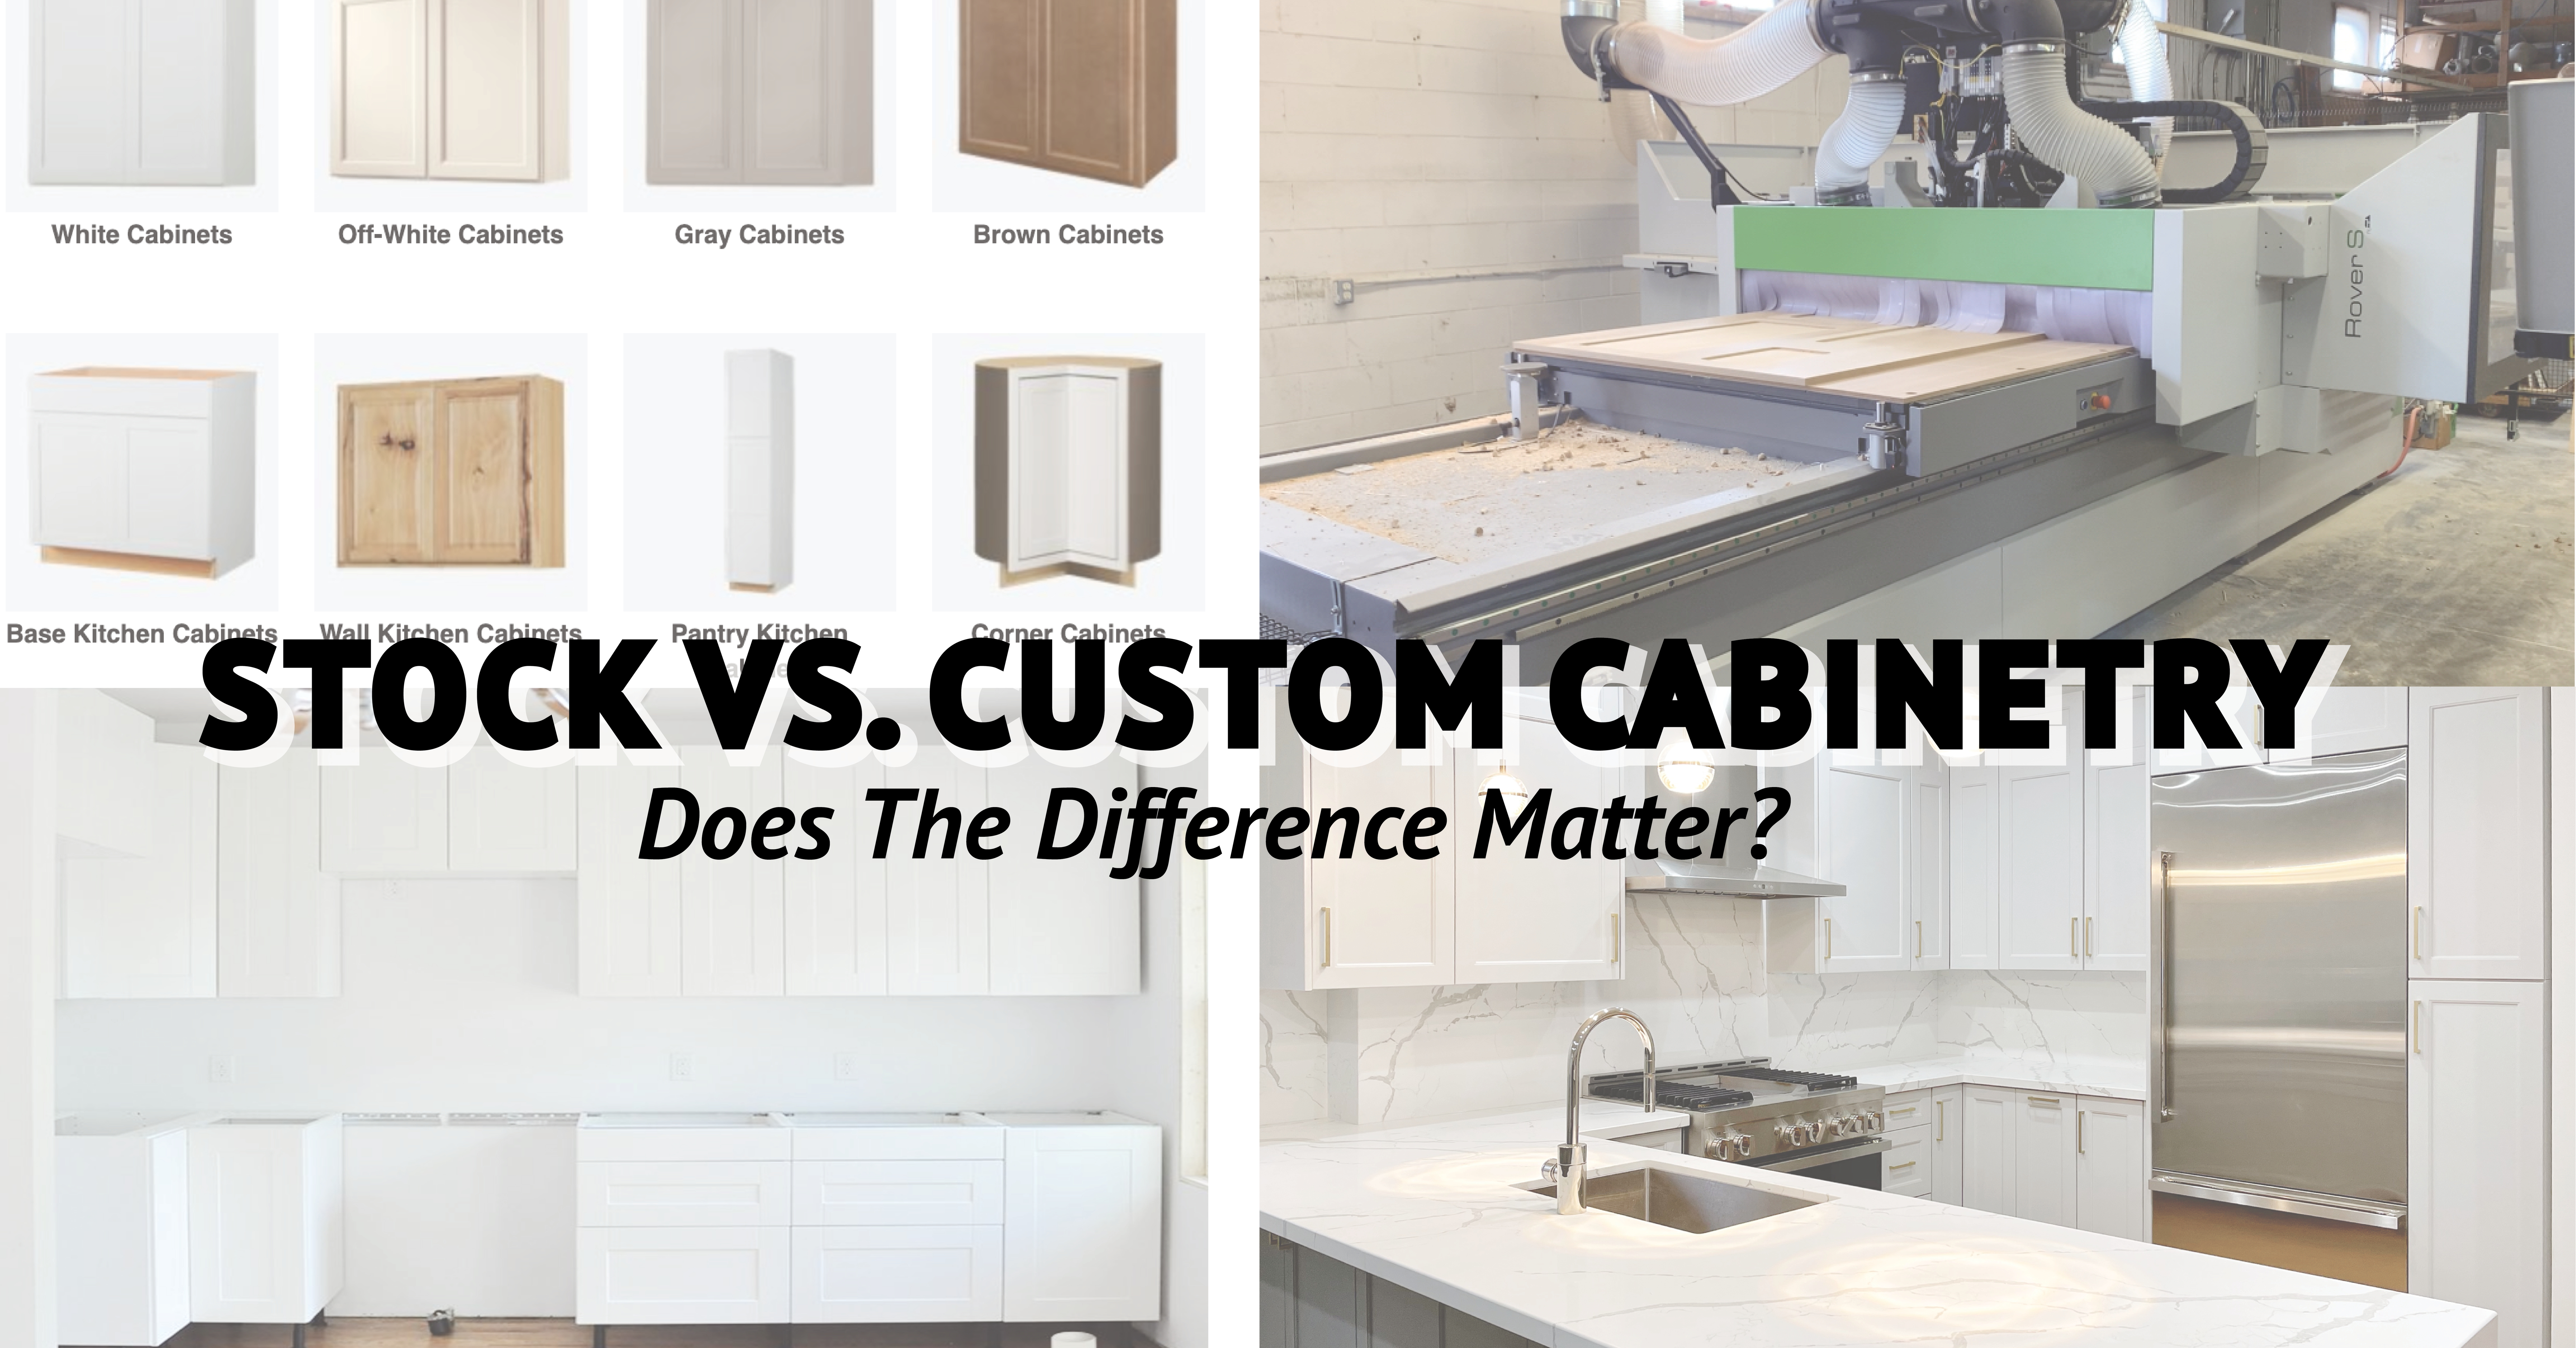 Stock Vs. Custom Cabinetry: Does The Difference Matter?